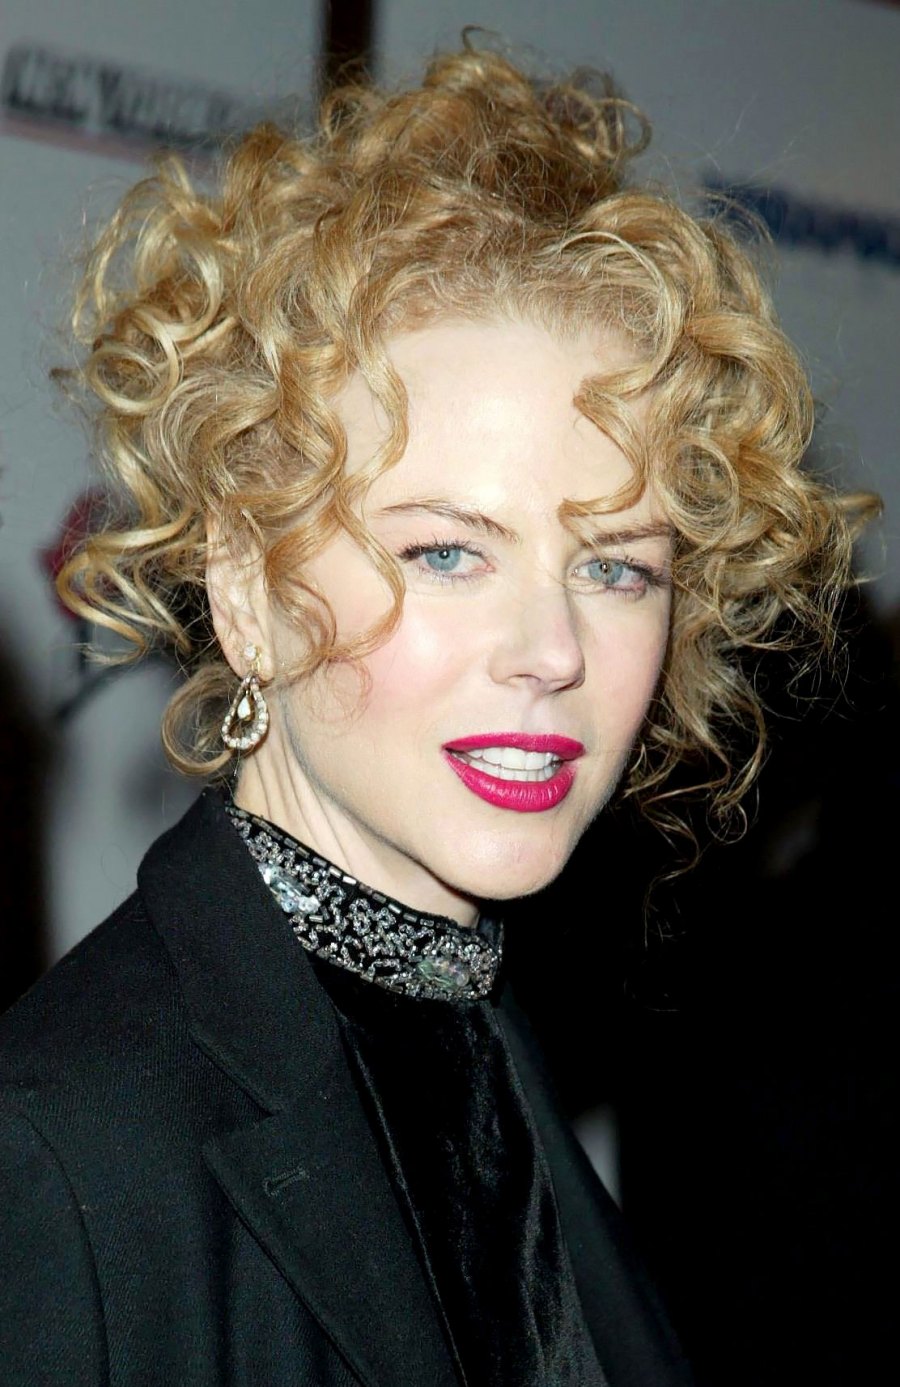 Nicole Kidman at 44: How Her Face Has Changed 2002